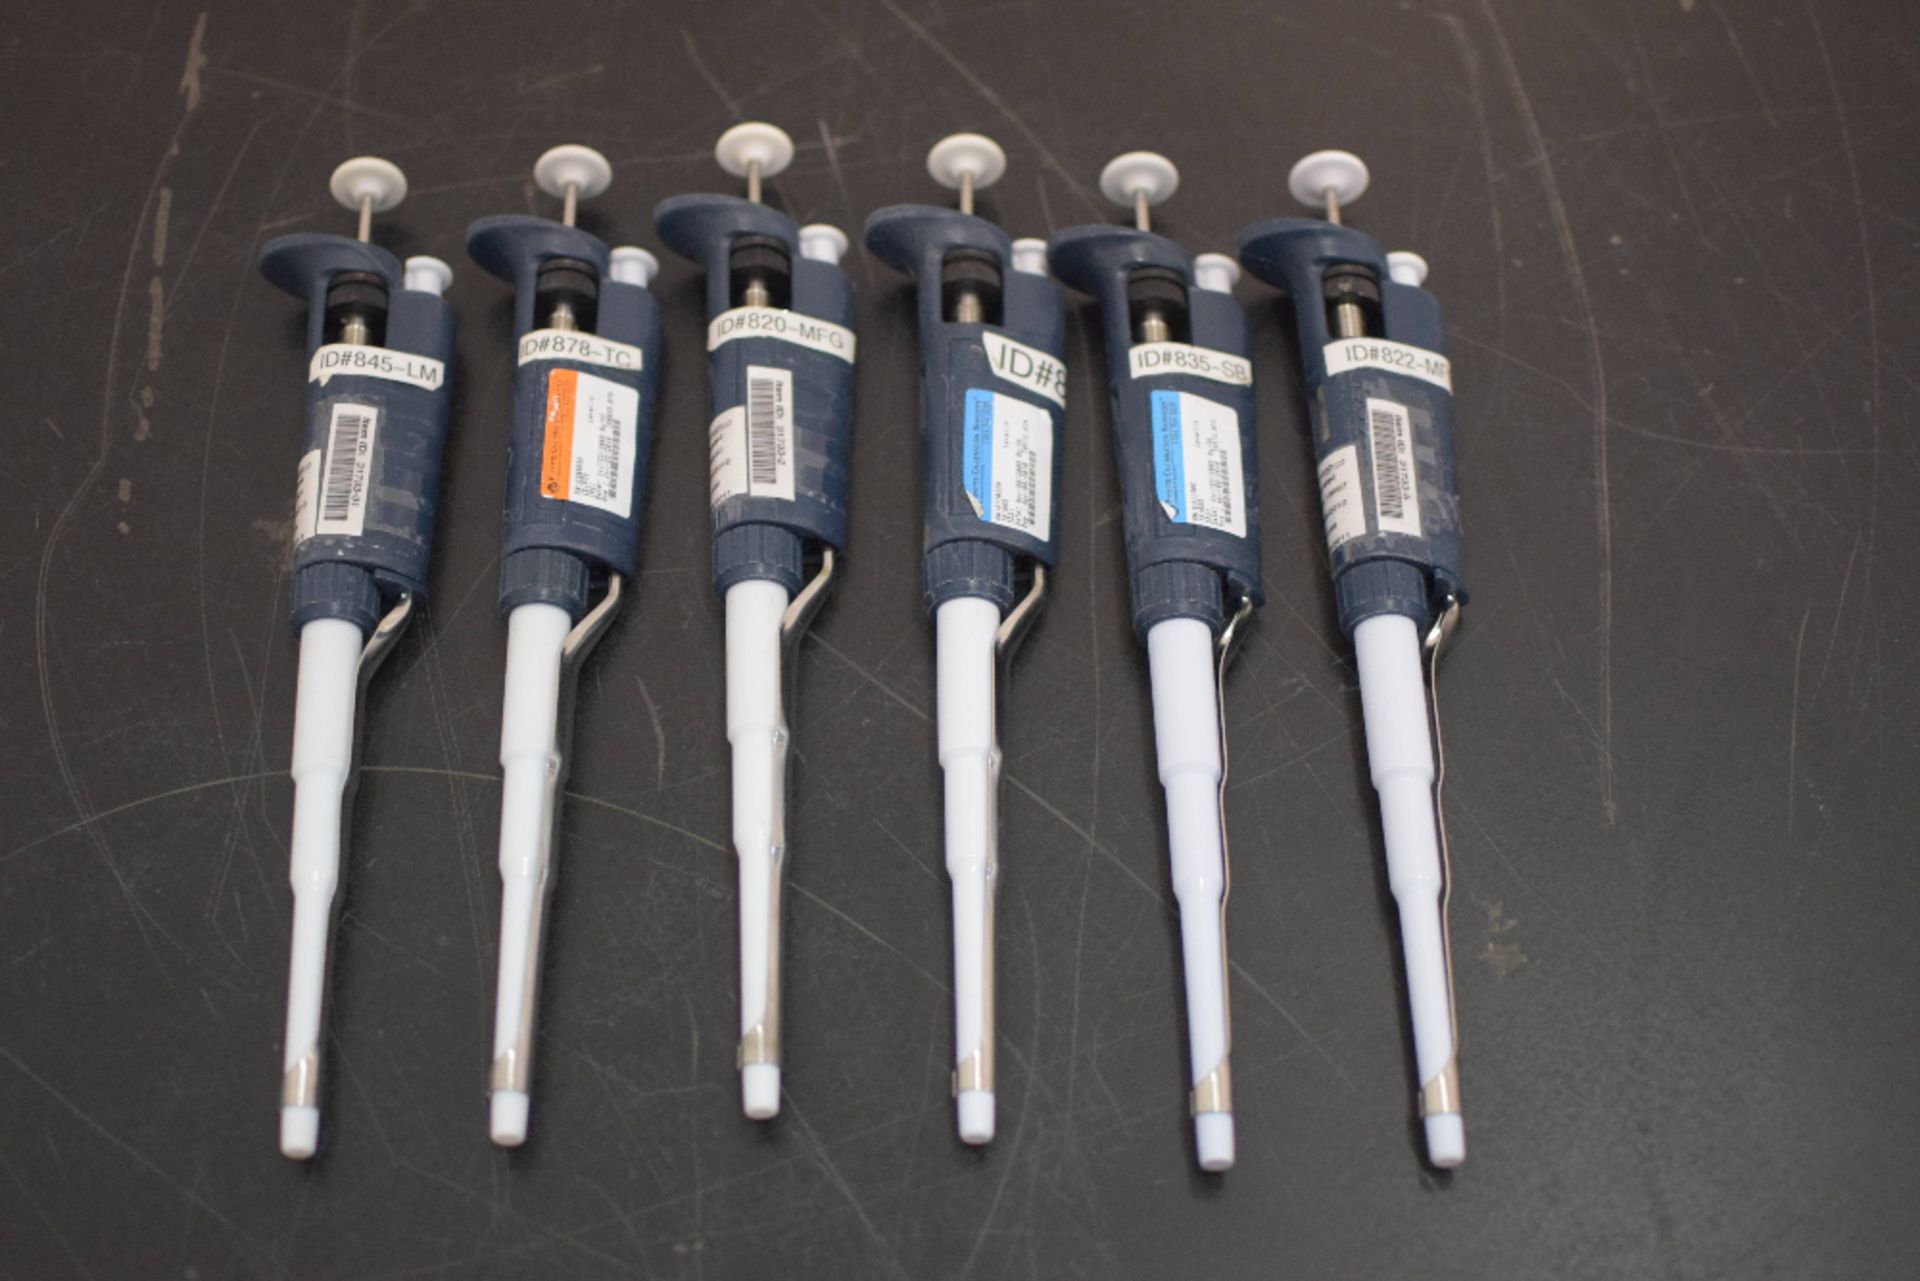 Lot of 6 Gilson P1000 200-100uL Pipettes